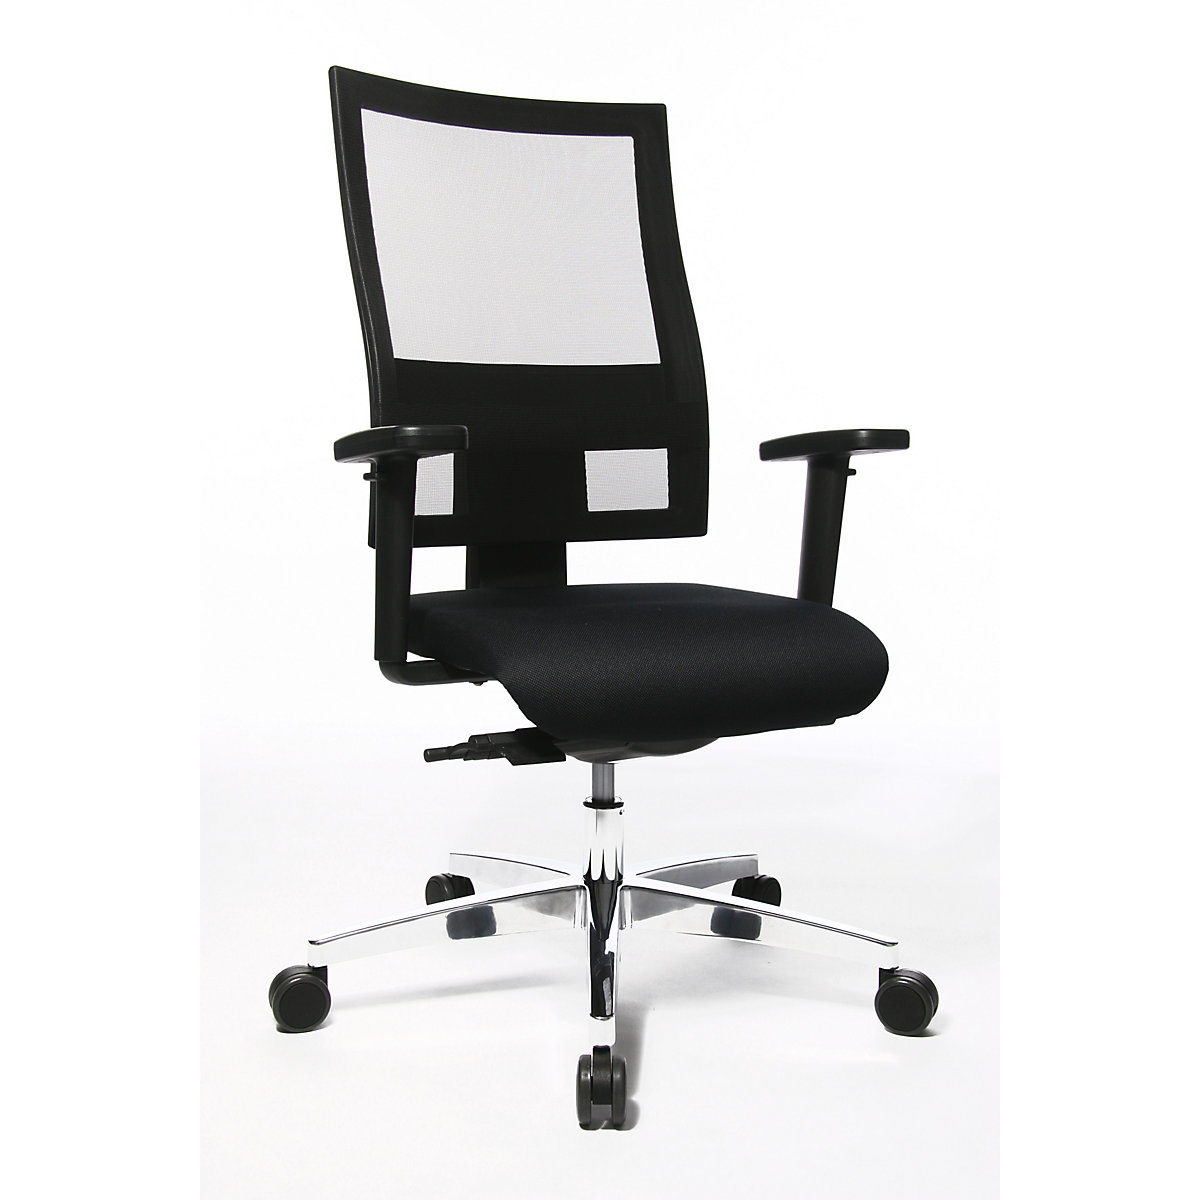 PROFI NET 11 office swivel chair – Topstar, height adjustable arm rests with soft padding, black-4